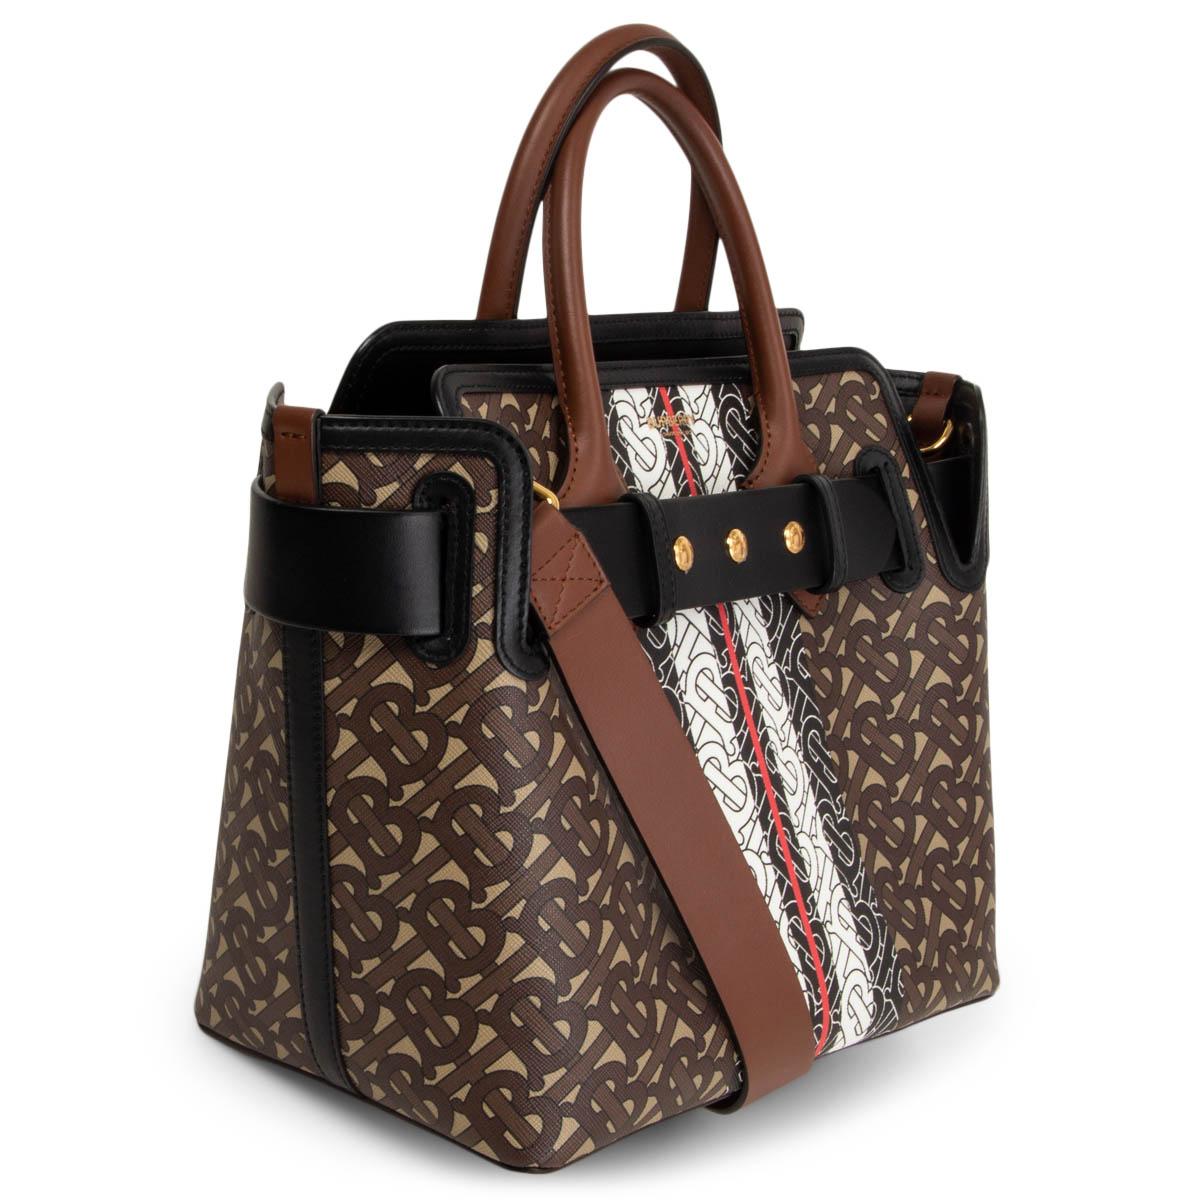 100% authentic Burberry 'Small Belted' tote in brown Monogram Stripe e-canvas with brown and black leather details. Adjustable and removable shoulder strap. Lined in black leather with two magnetic snap pockets. Has been carried and is in virtually